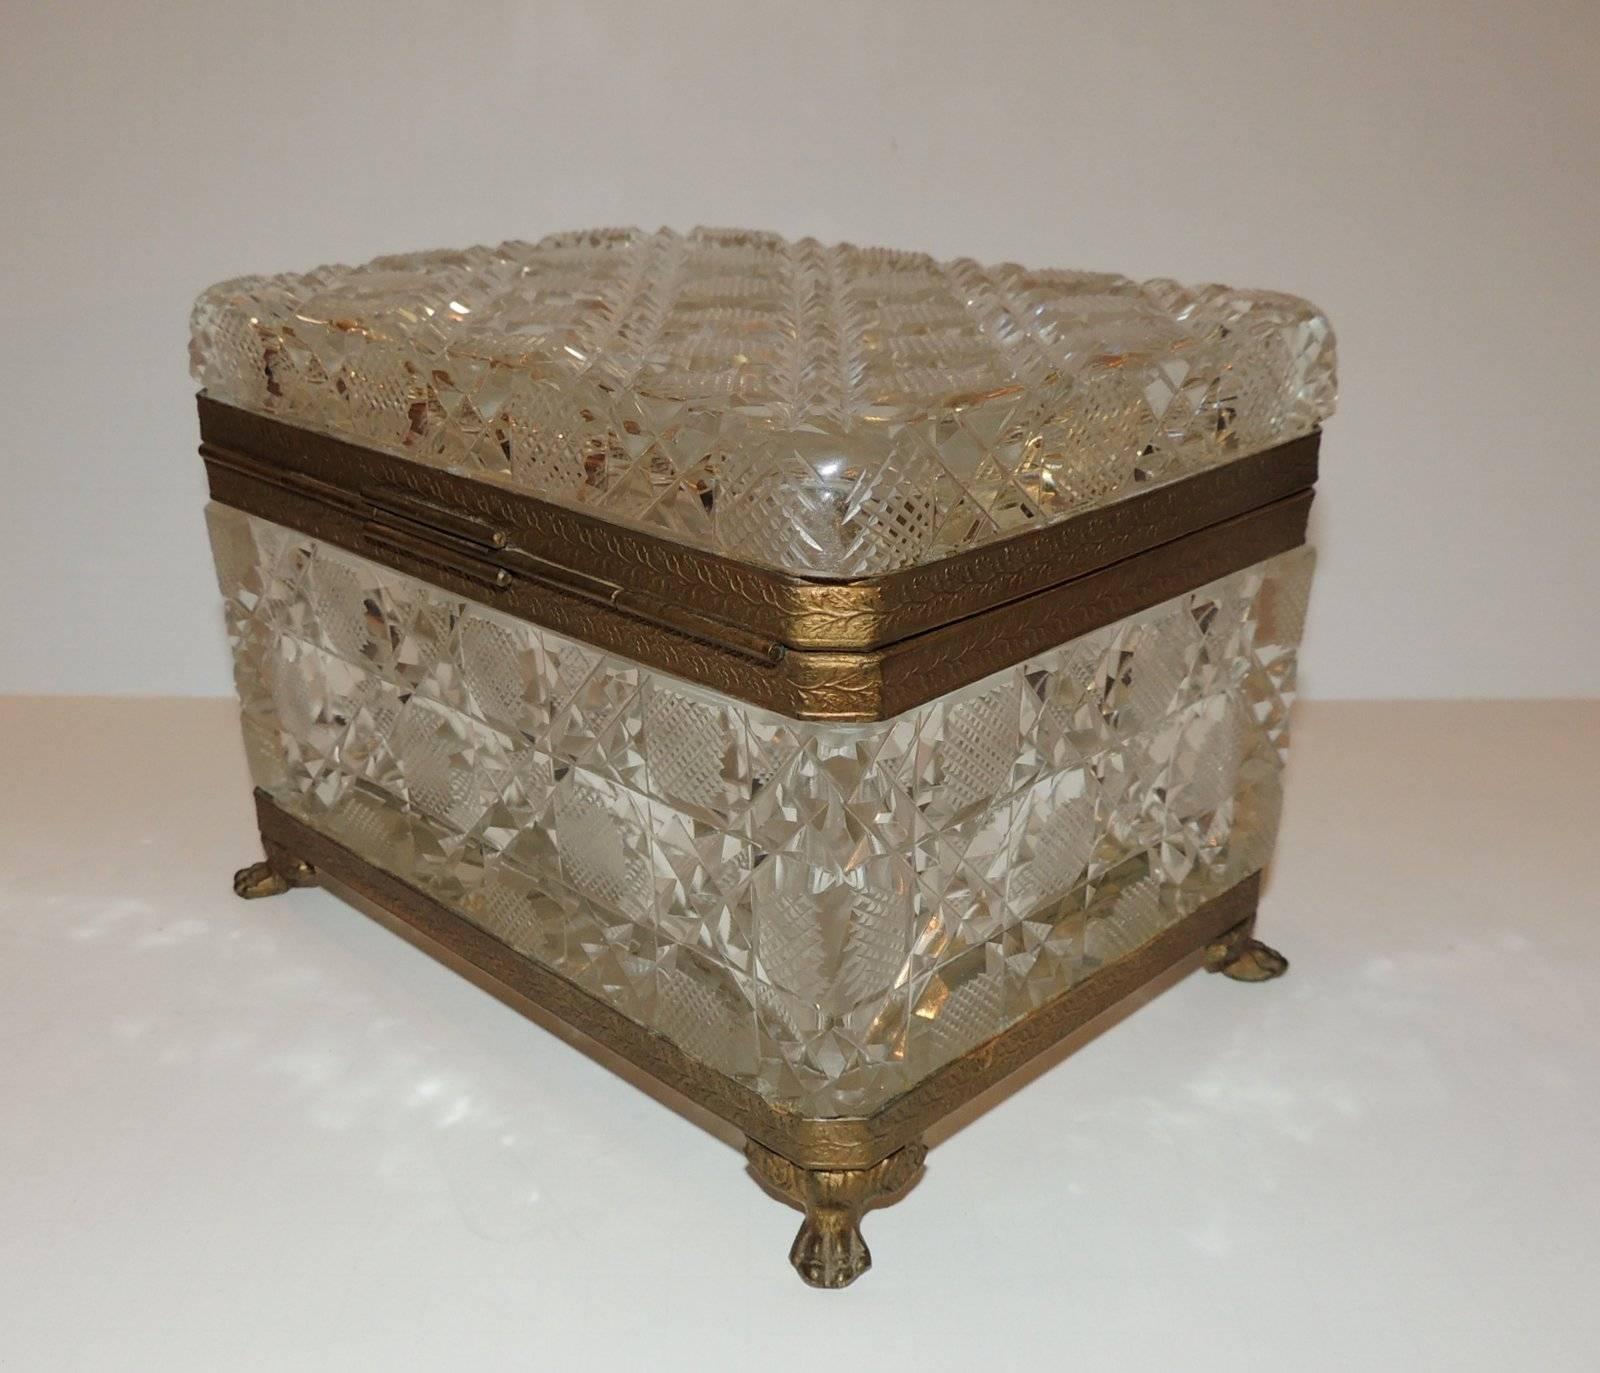 Gilt Wonderful French Faceted Crystal Bronze Ormolu-Mounted Footed Casket Jewelry Box